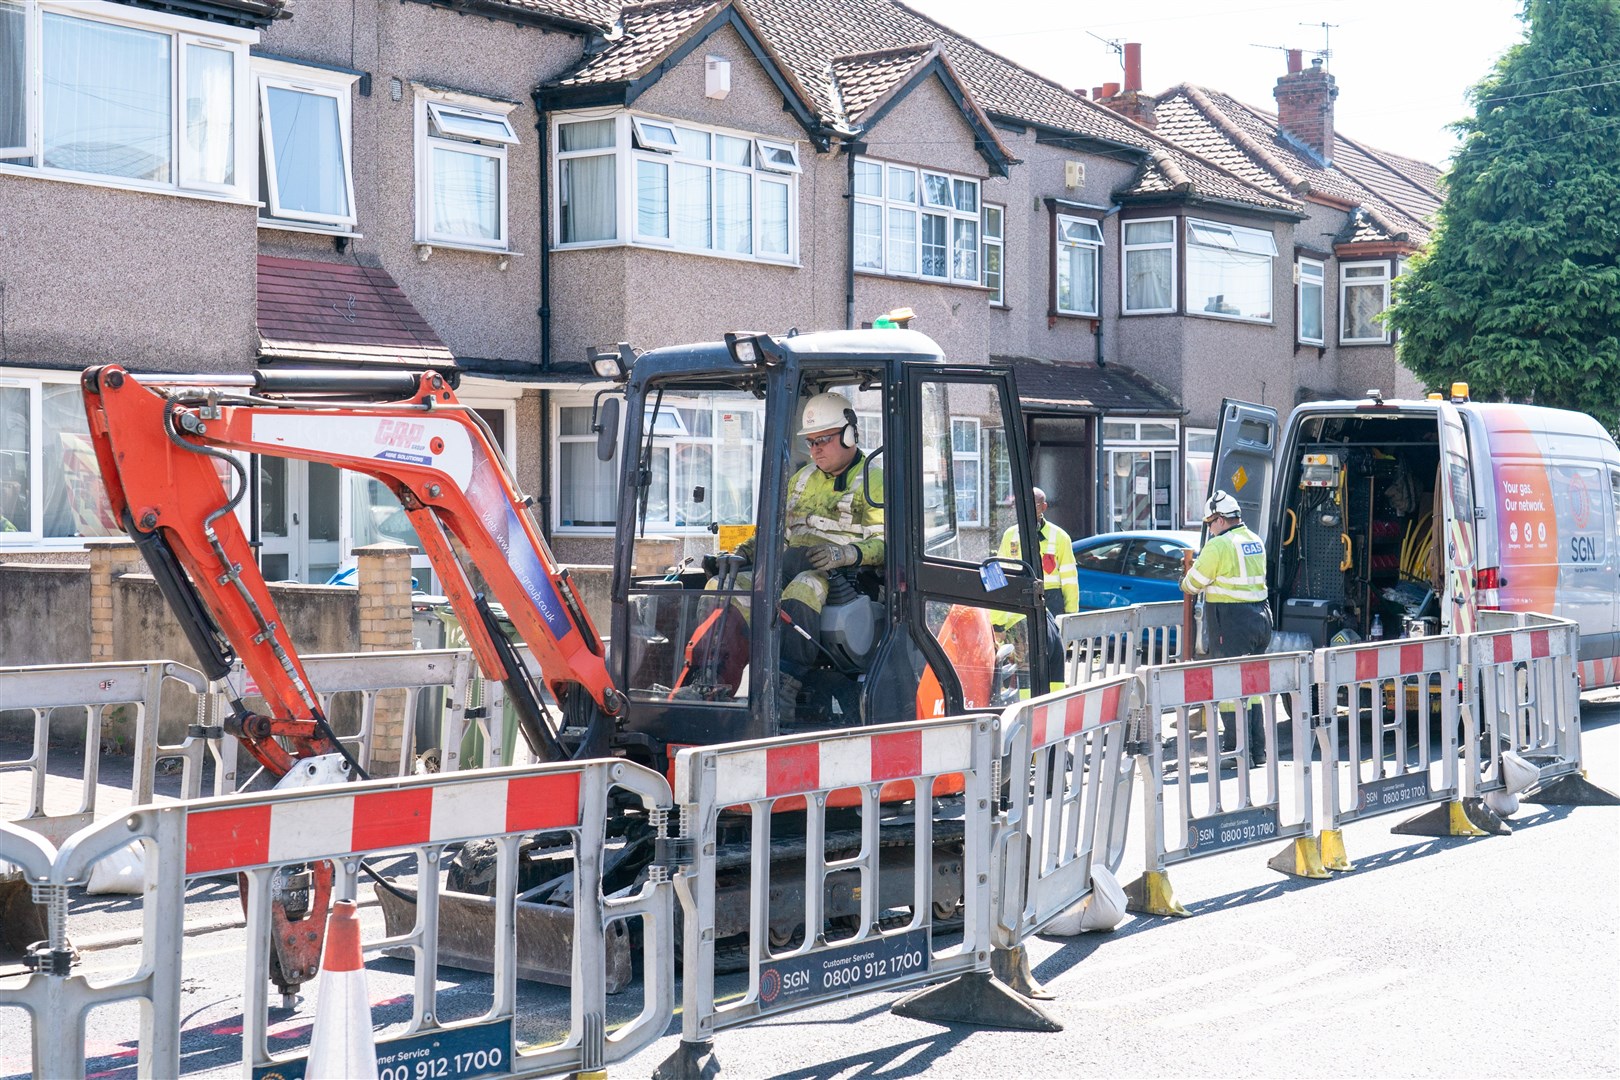 Gas engineers at work near the scene of the explosion on Galpin’s Road in Thornton Heath (Dominic Lipinski/PA)